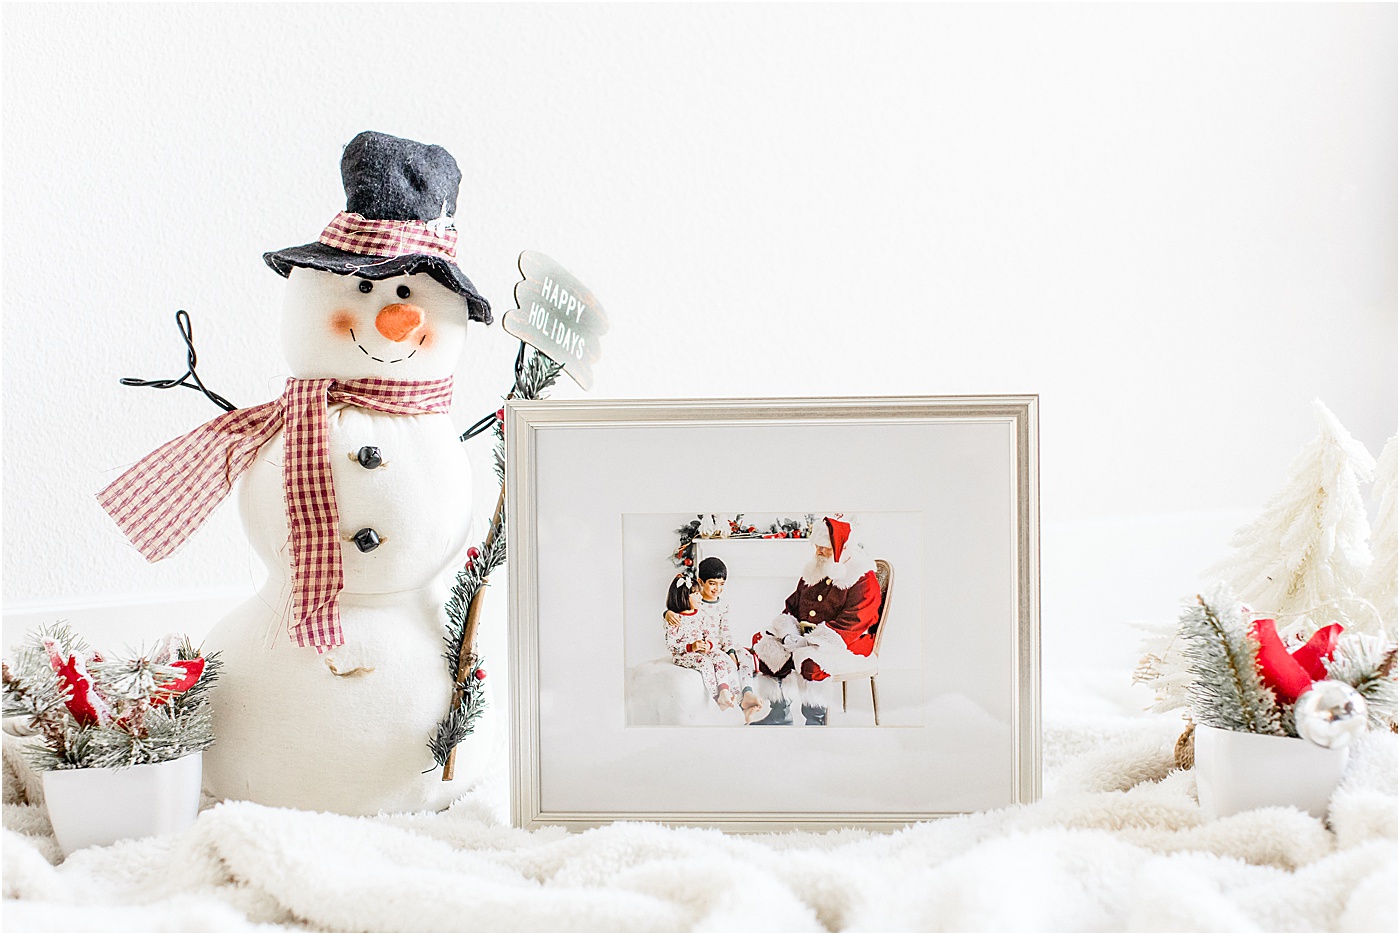 Custom wood frame with image of Santa with children. Photo by Sana Ahmed Photography.